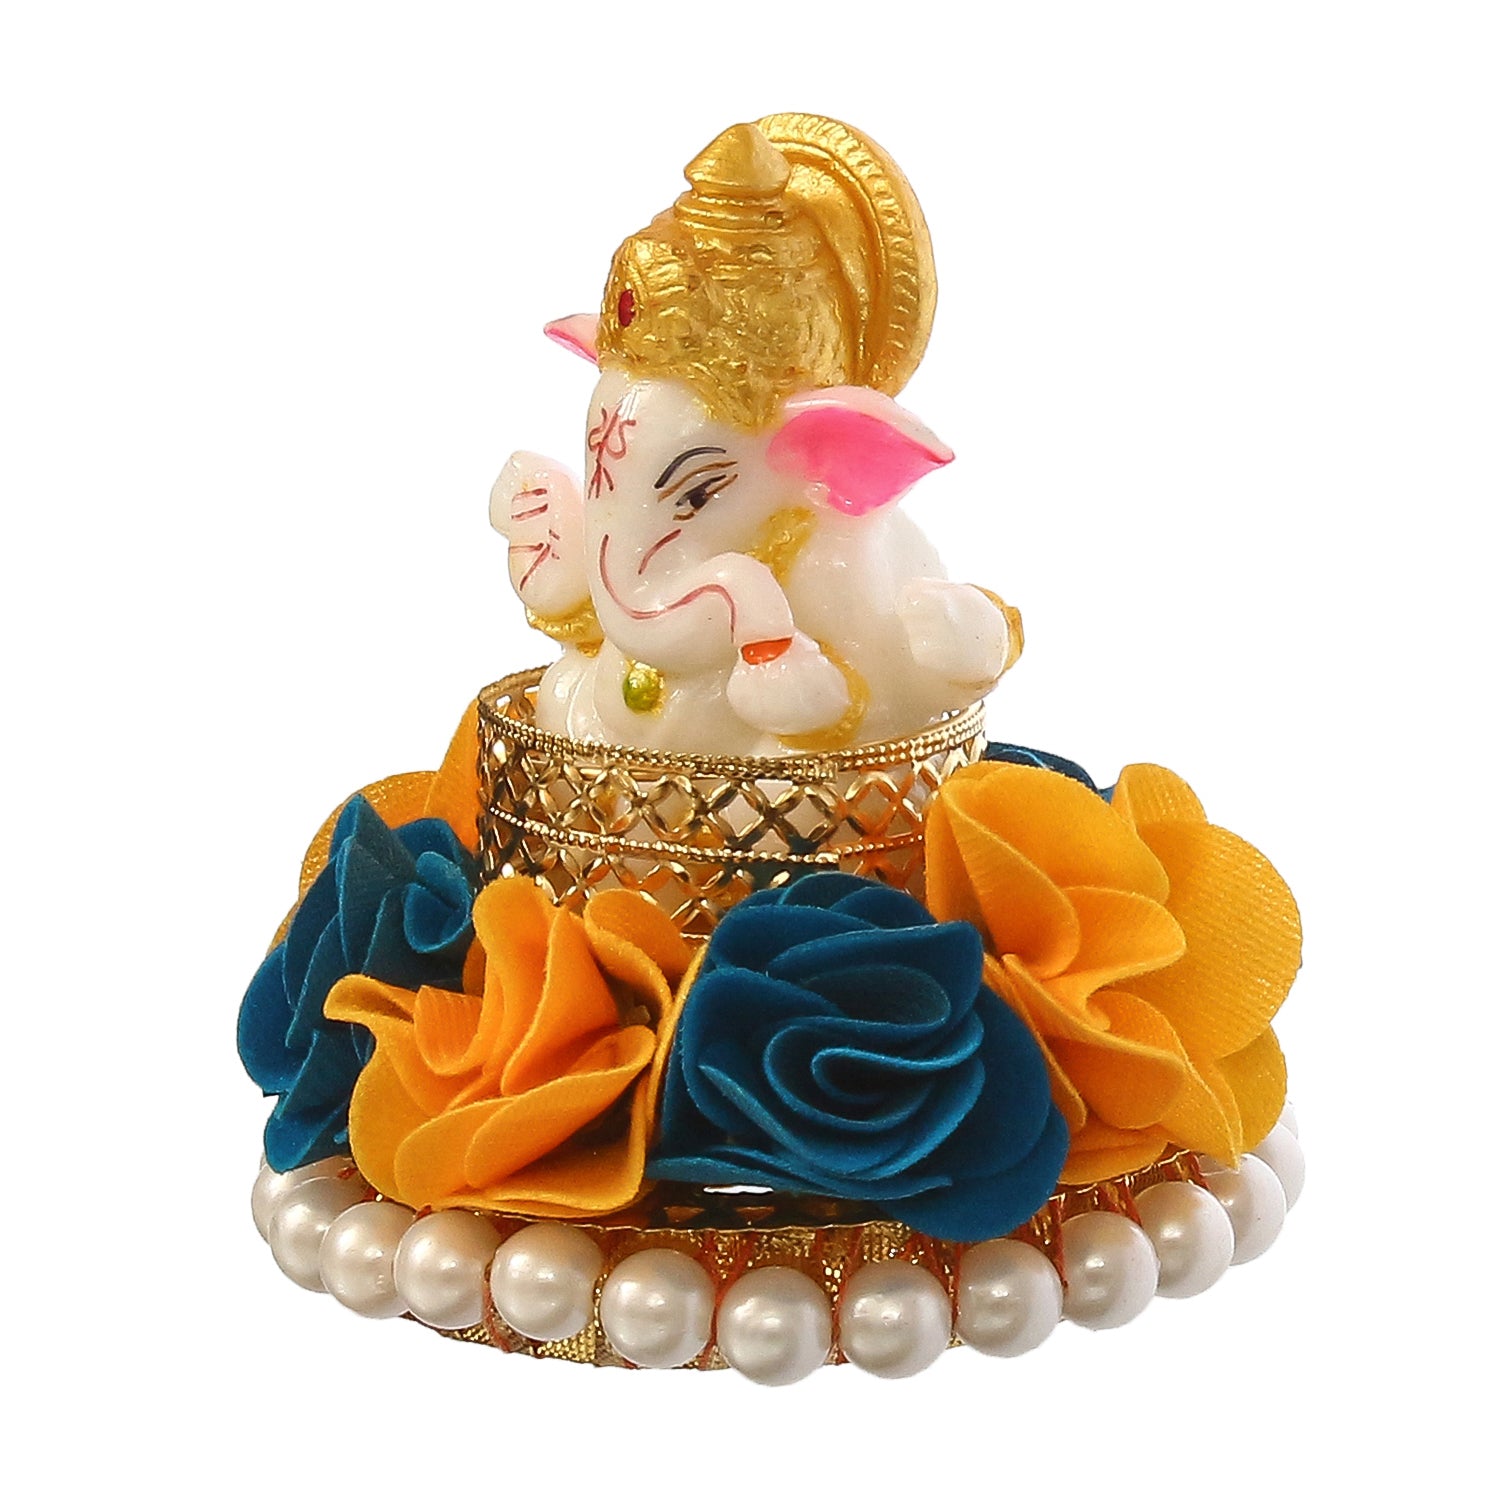 Lord Ganesha Idol on Decorative Handcrafted Plate with Yellow and Blue Flowers 4